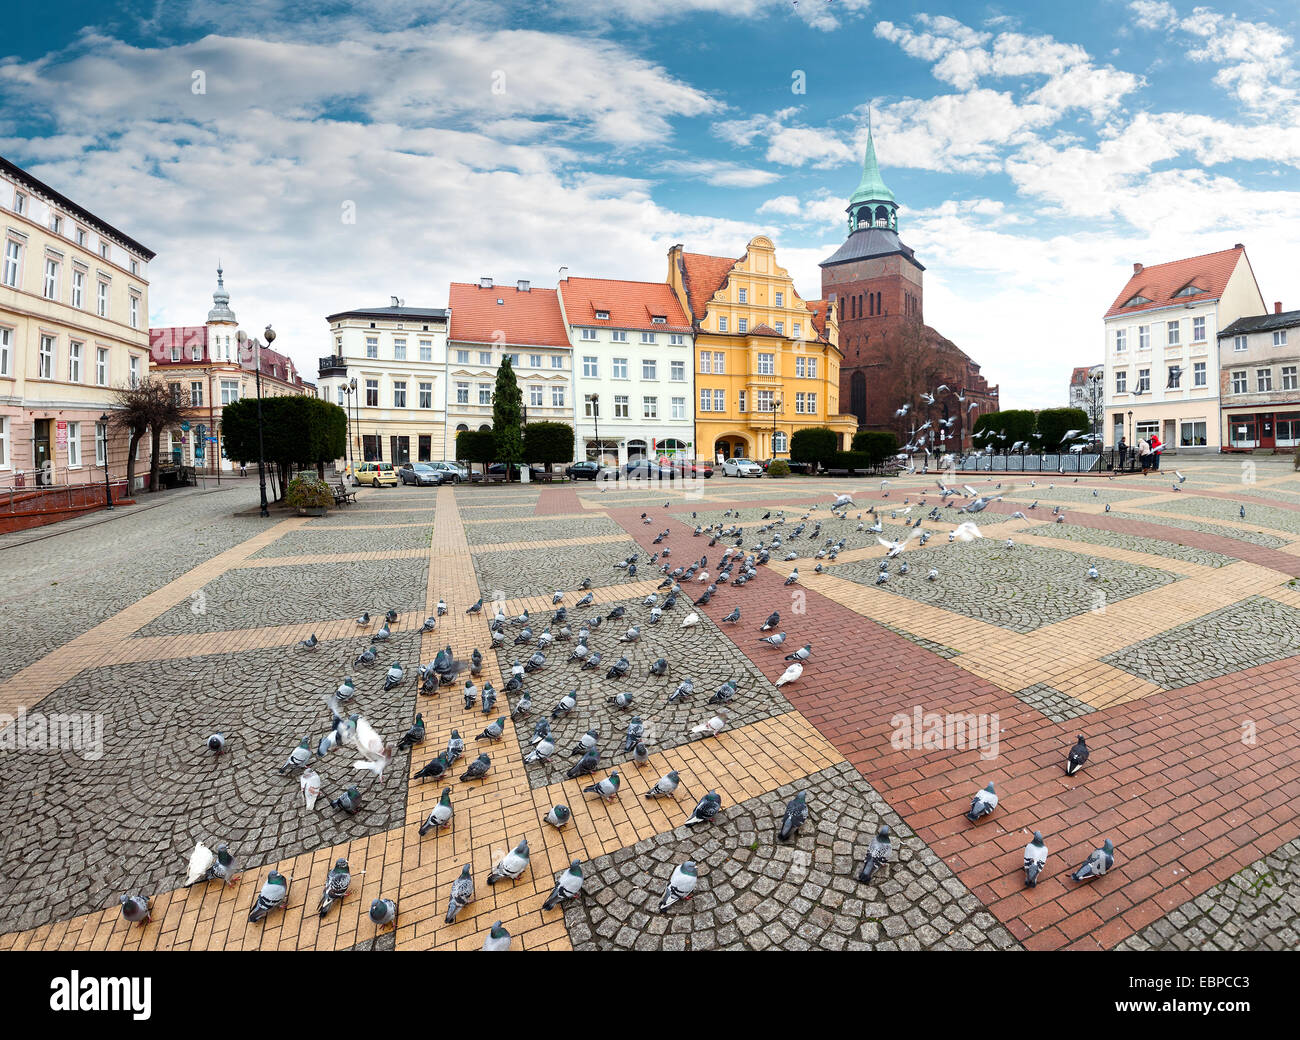 Liberty square in Bialogard, a town of birth of Aleksander Kwasniewski, the President of Poland from 1995 to 2005. Stock Photo